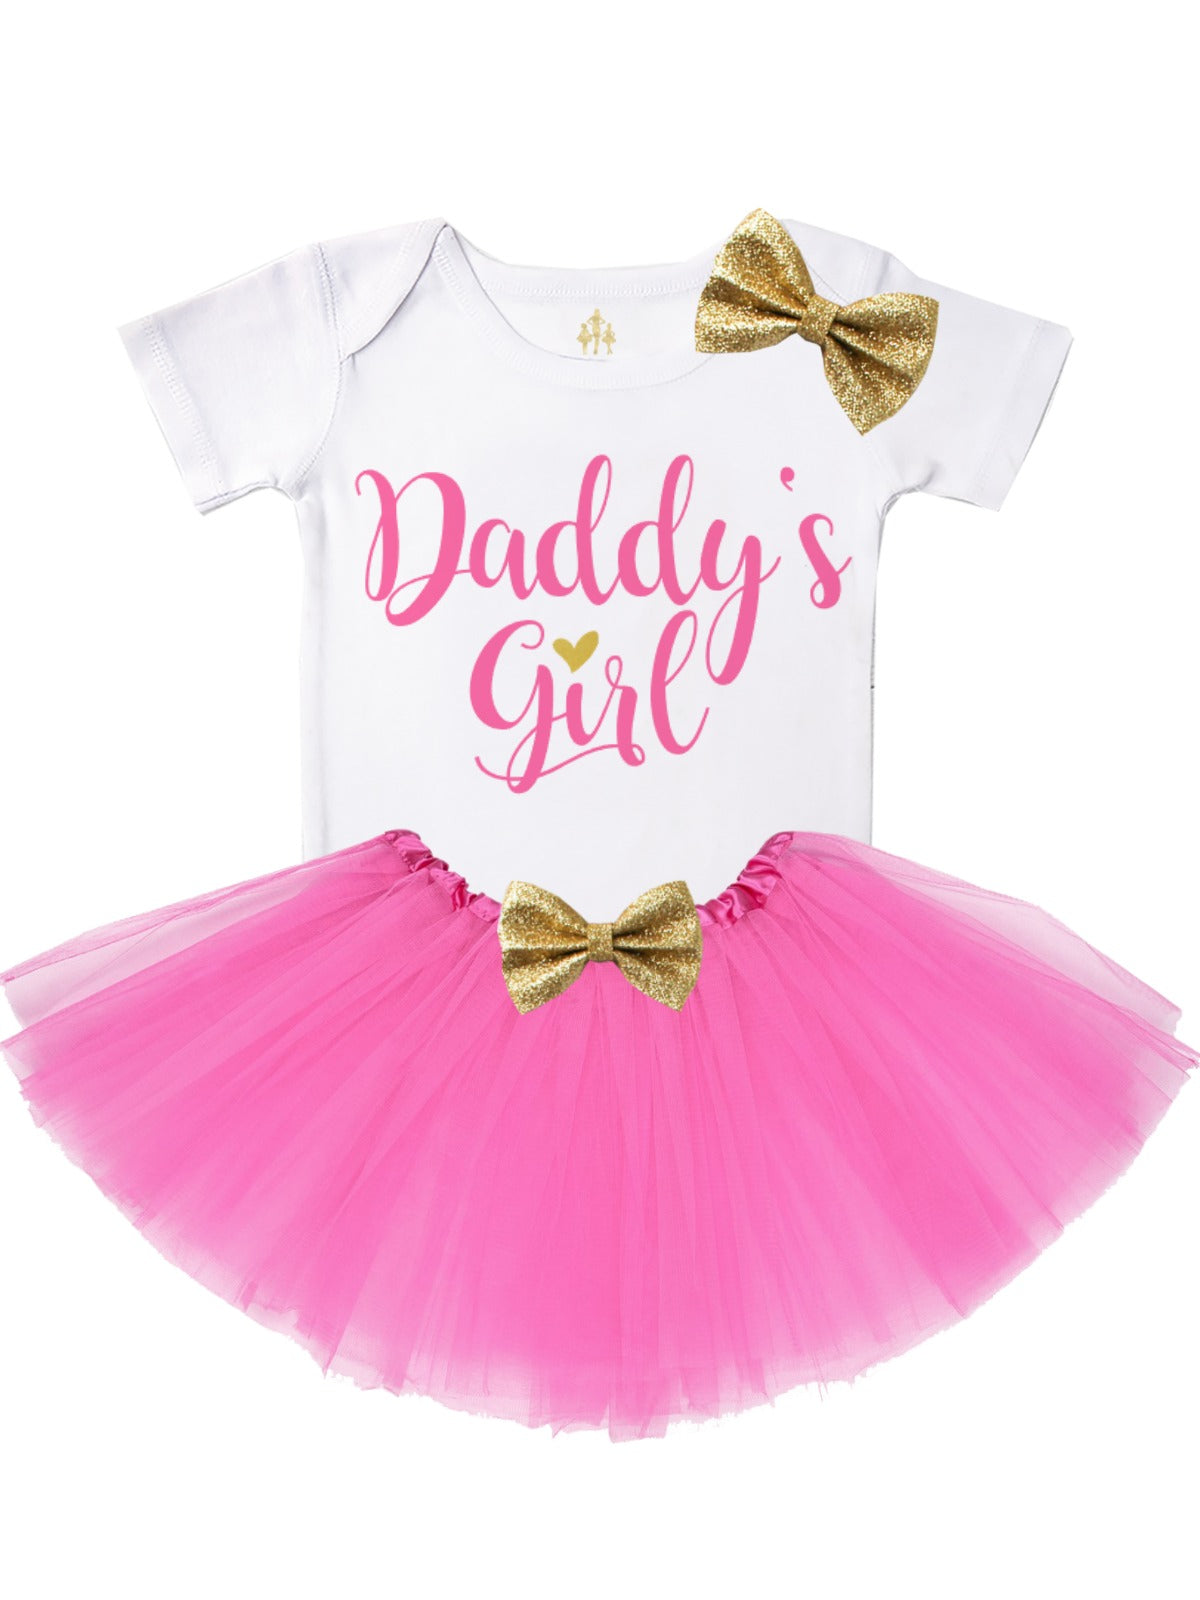 Daddy's Girl baby girl tutu outfit pink and gold